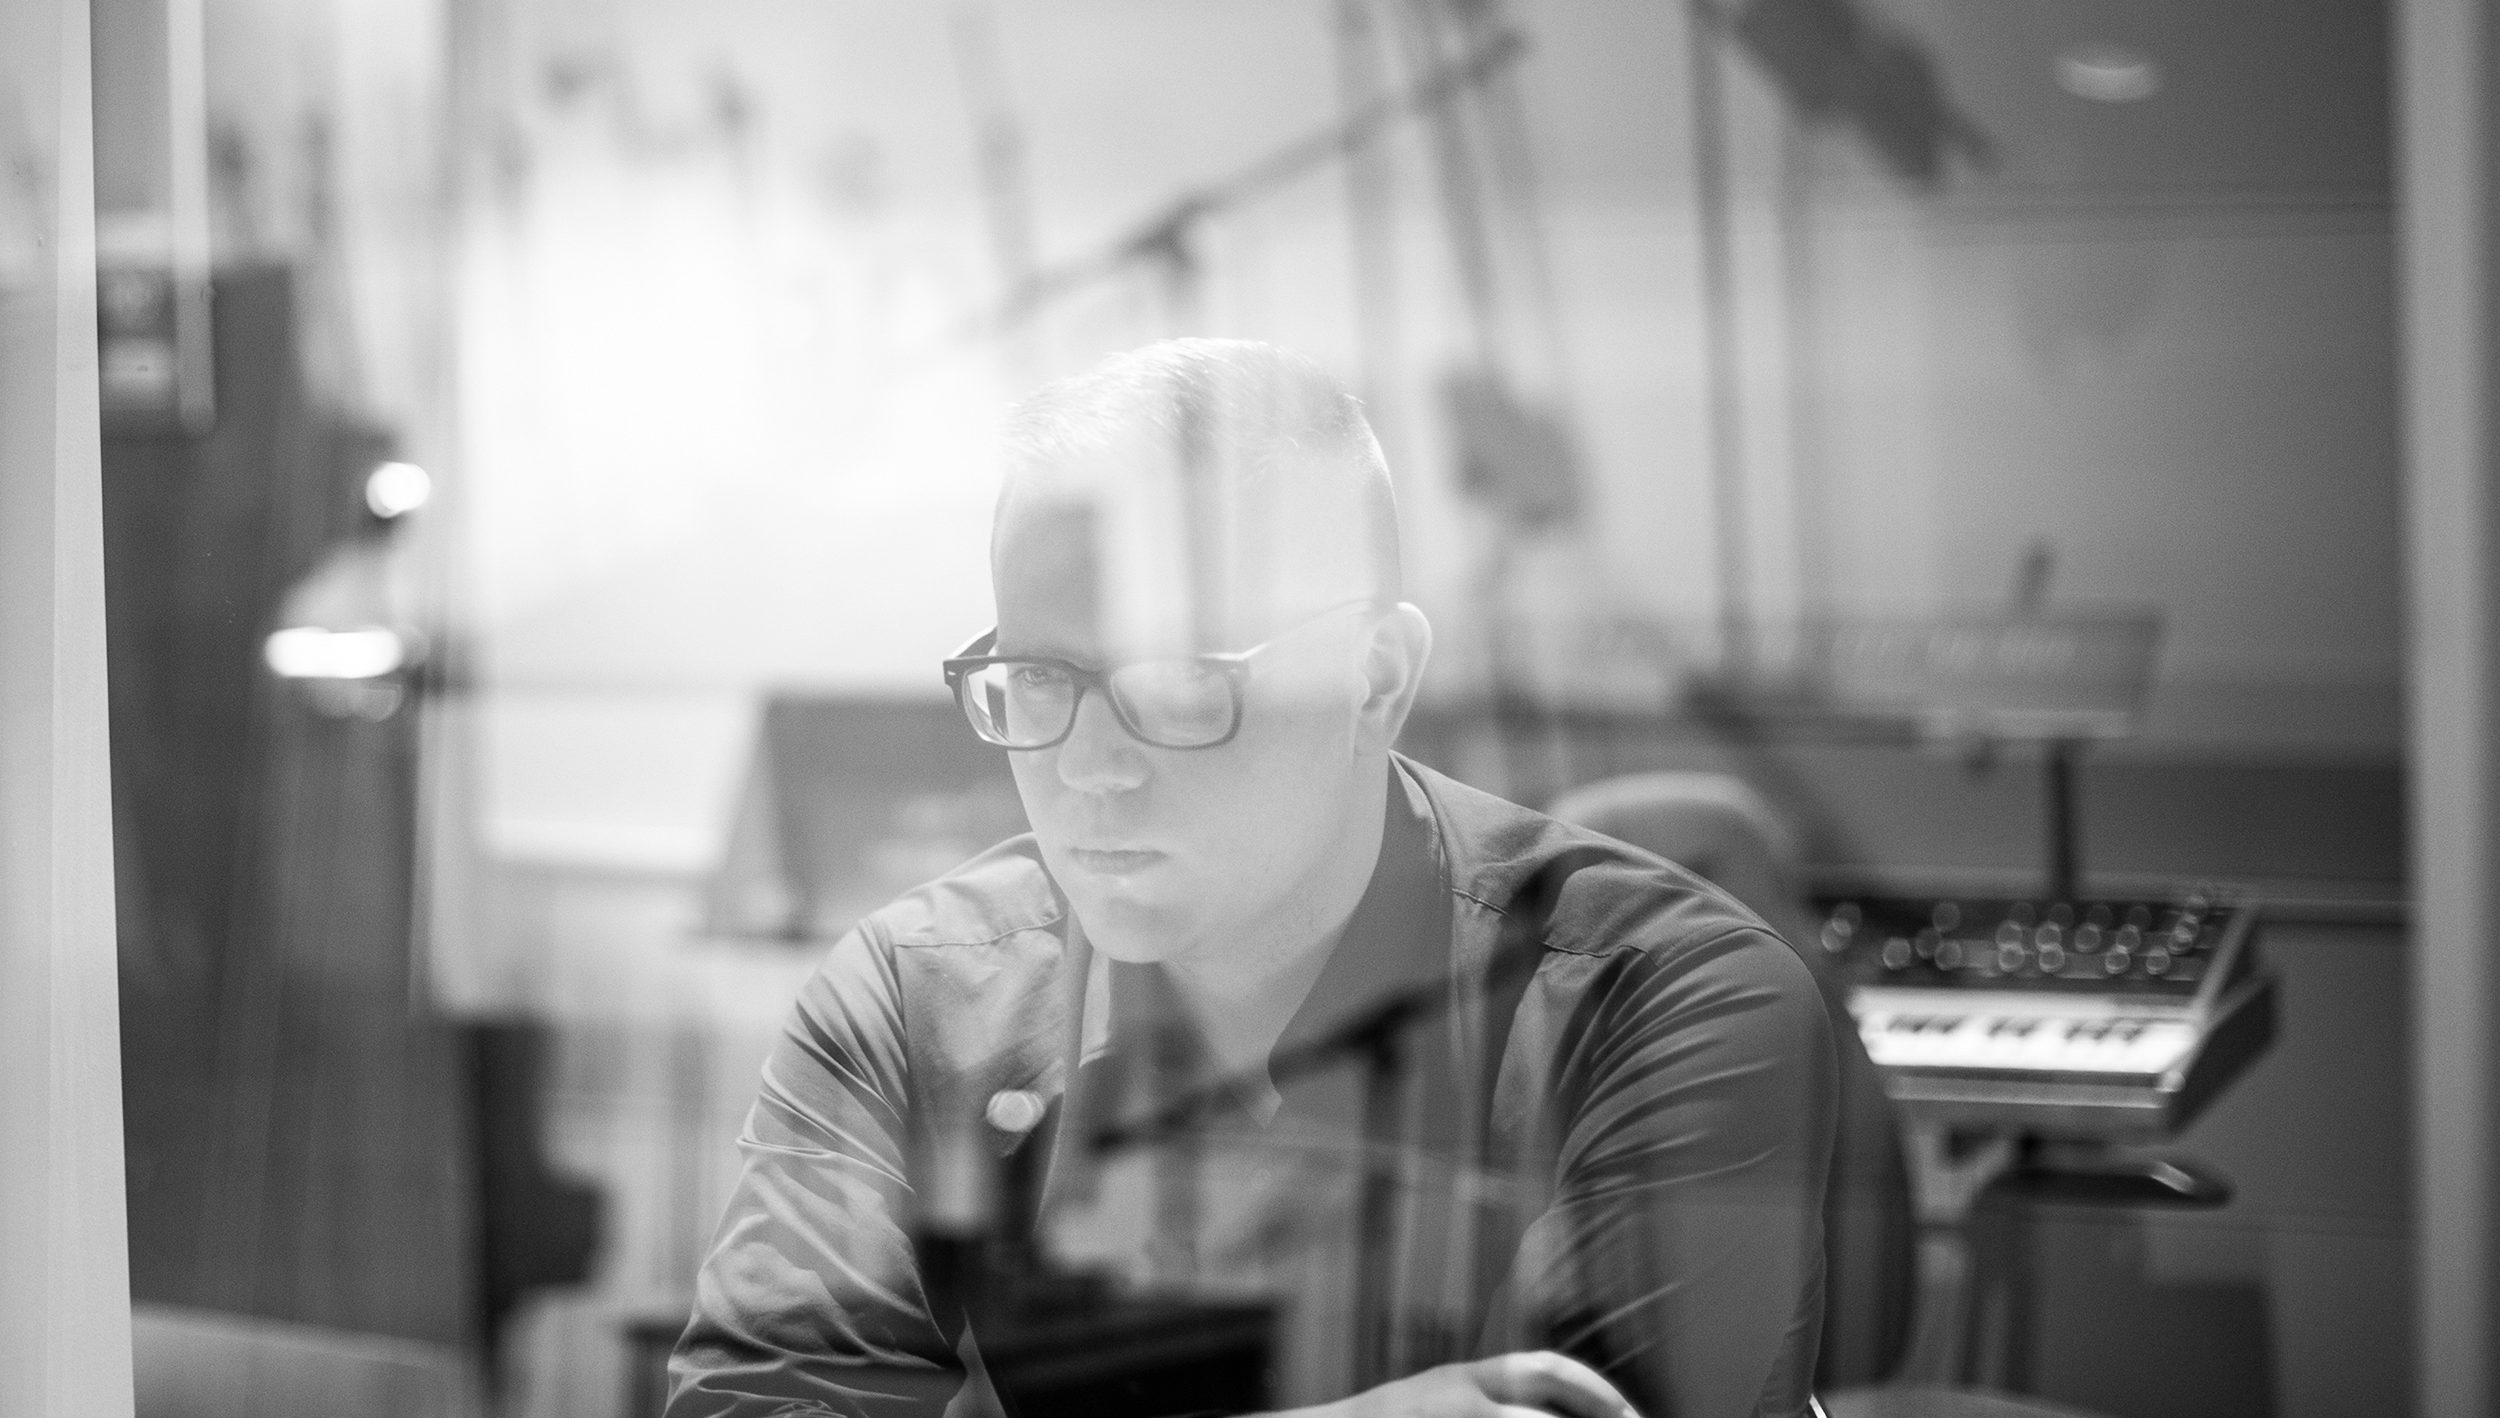 Black and white photo of Eliot Britton sitting in a music studio behind glass that is reflecting rod-like shapes